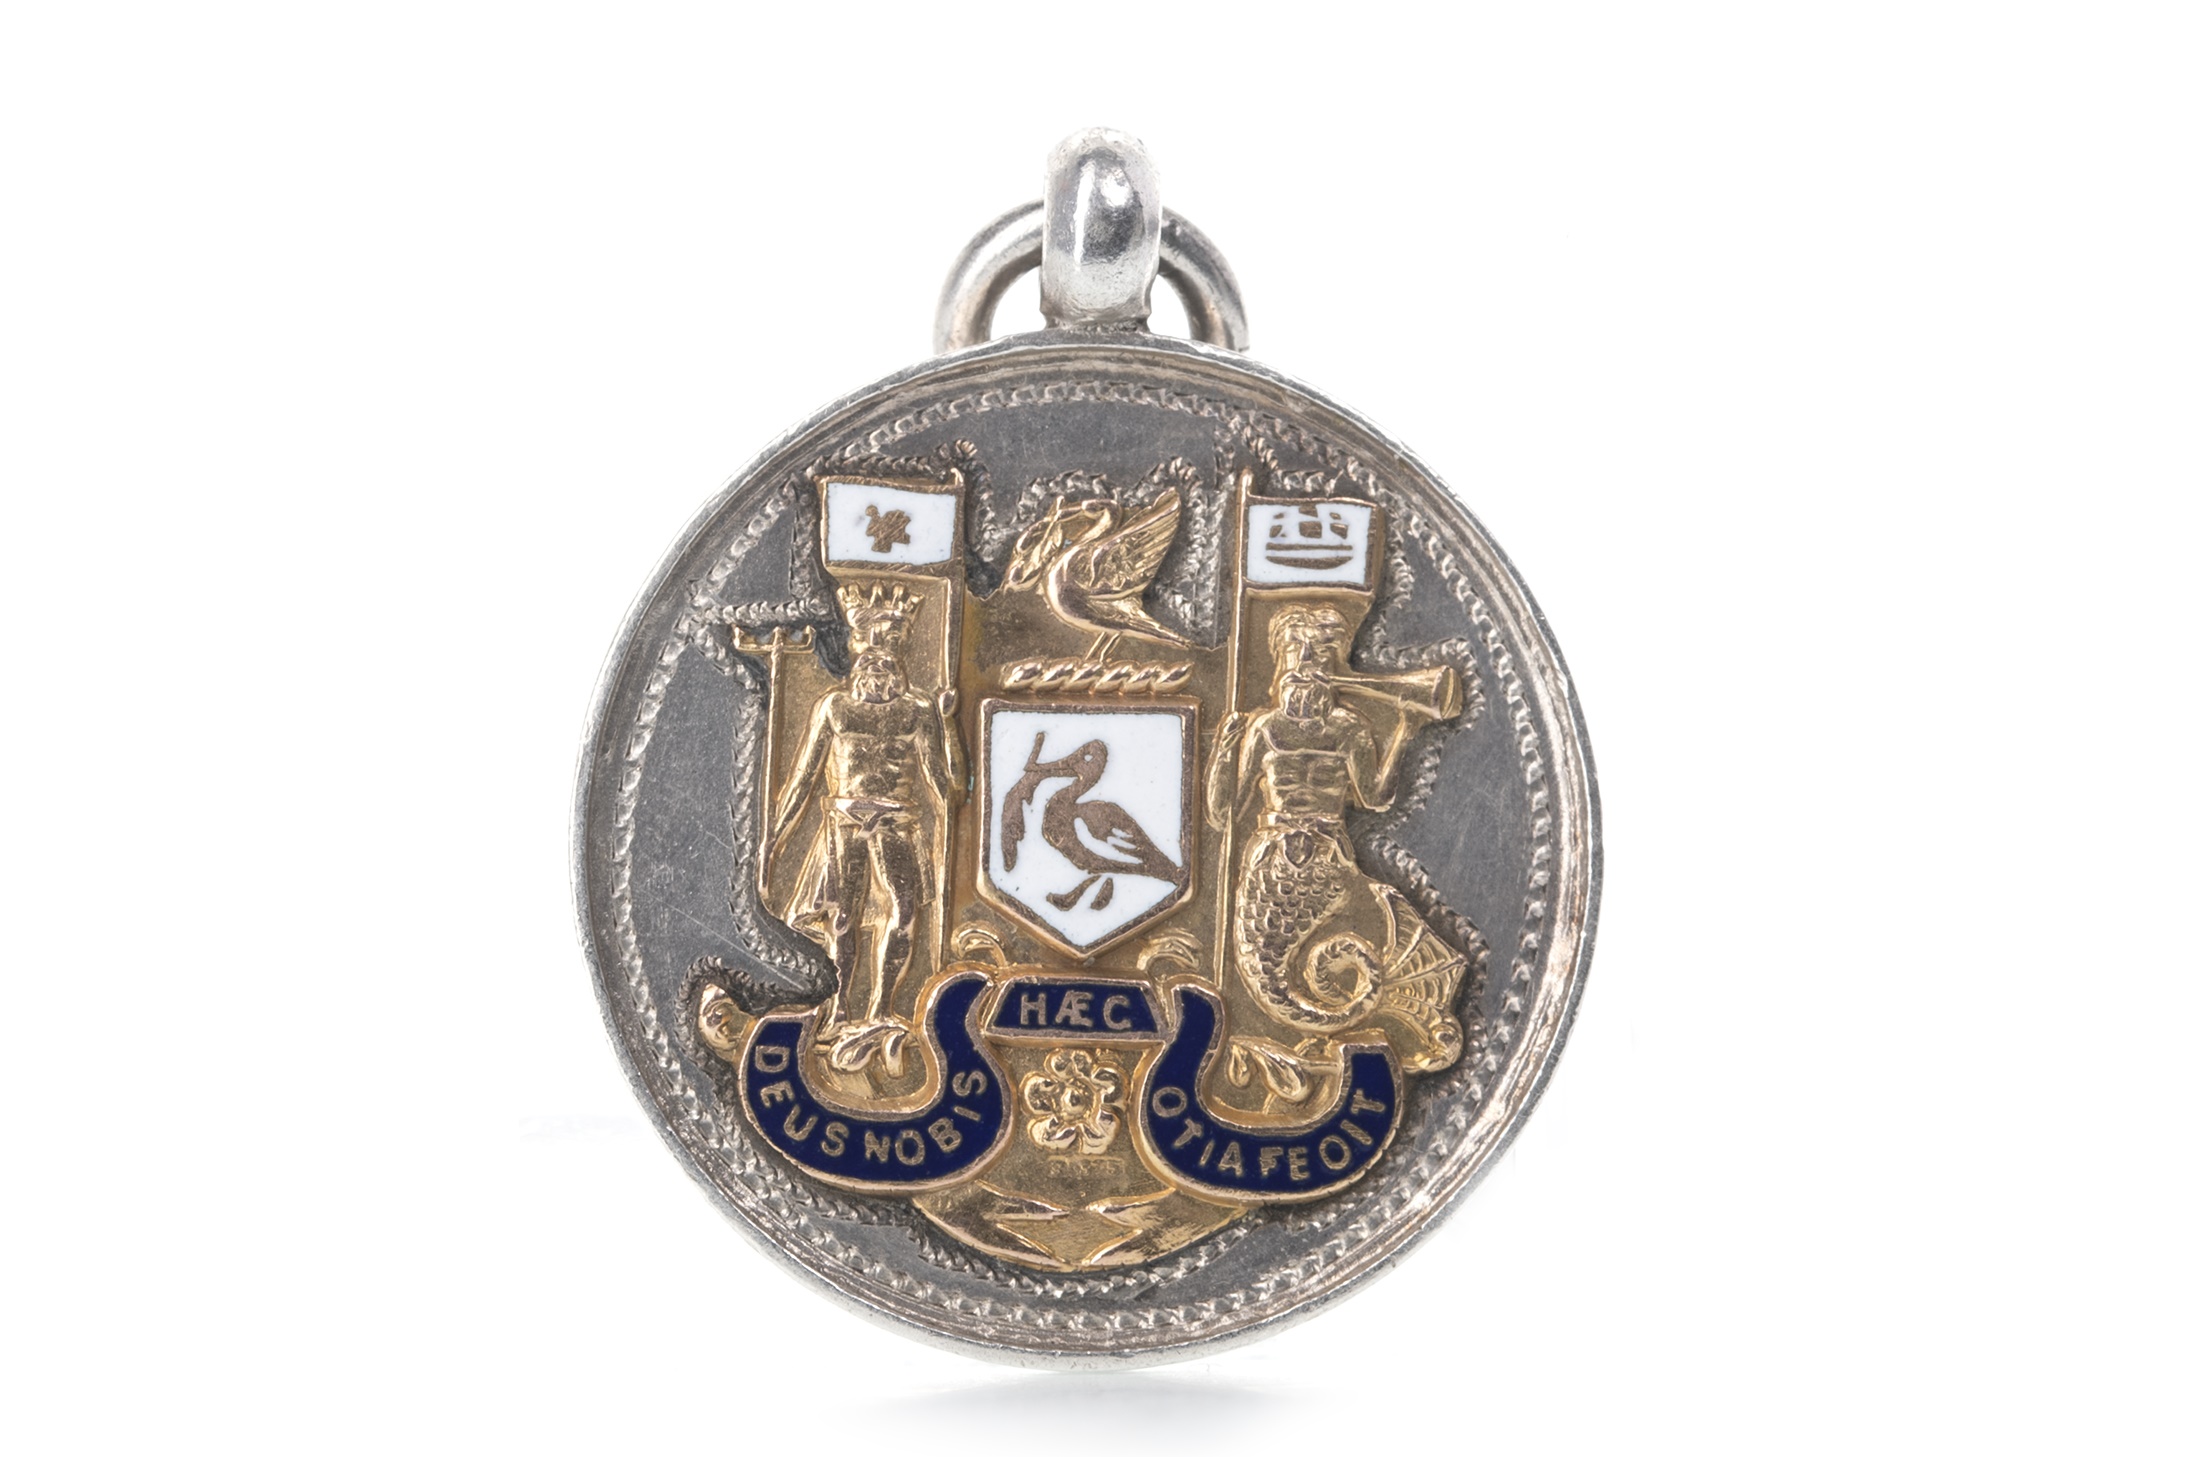 A LIVERPOOL HOSPITAL CUP SILVER MEDAL 1938 - Image 3 of 3